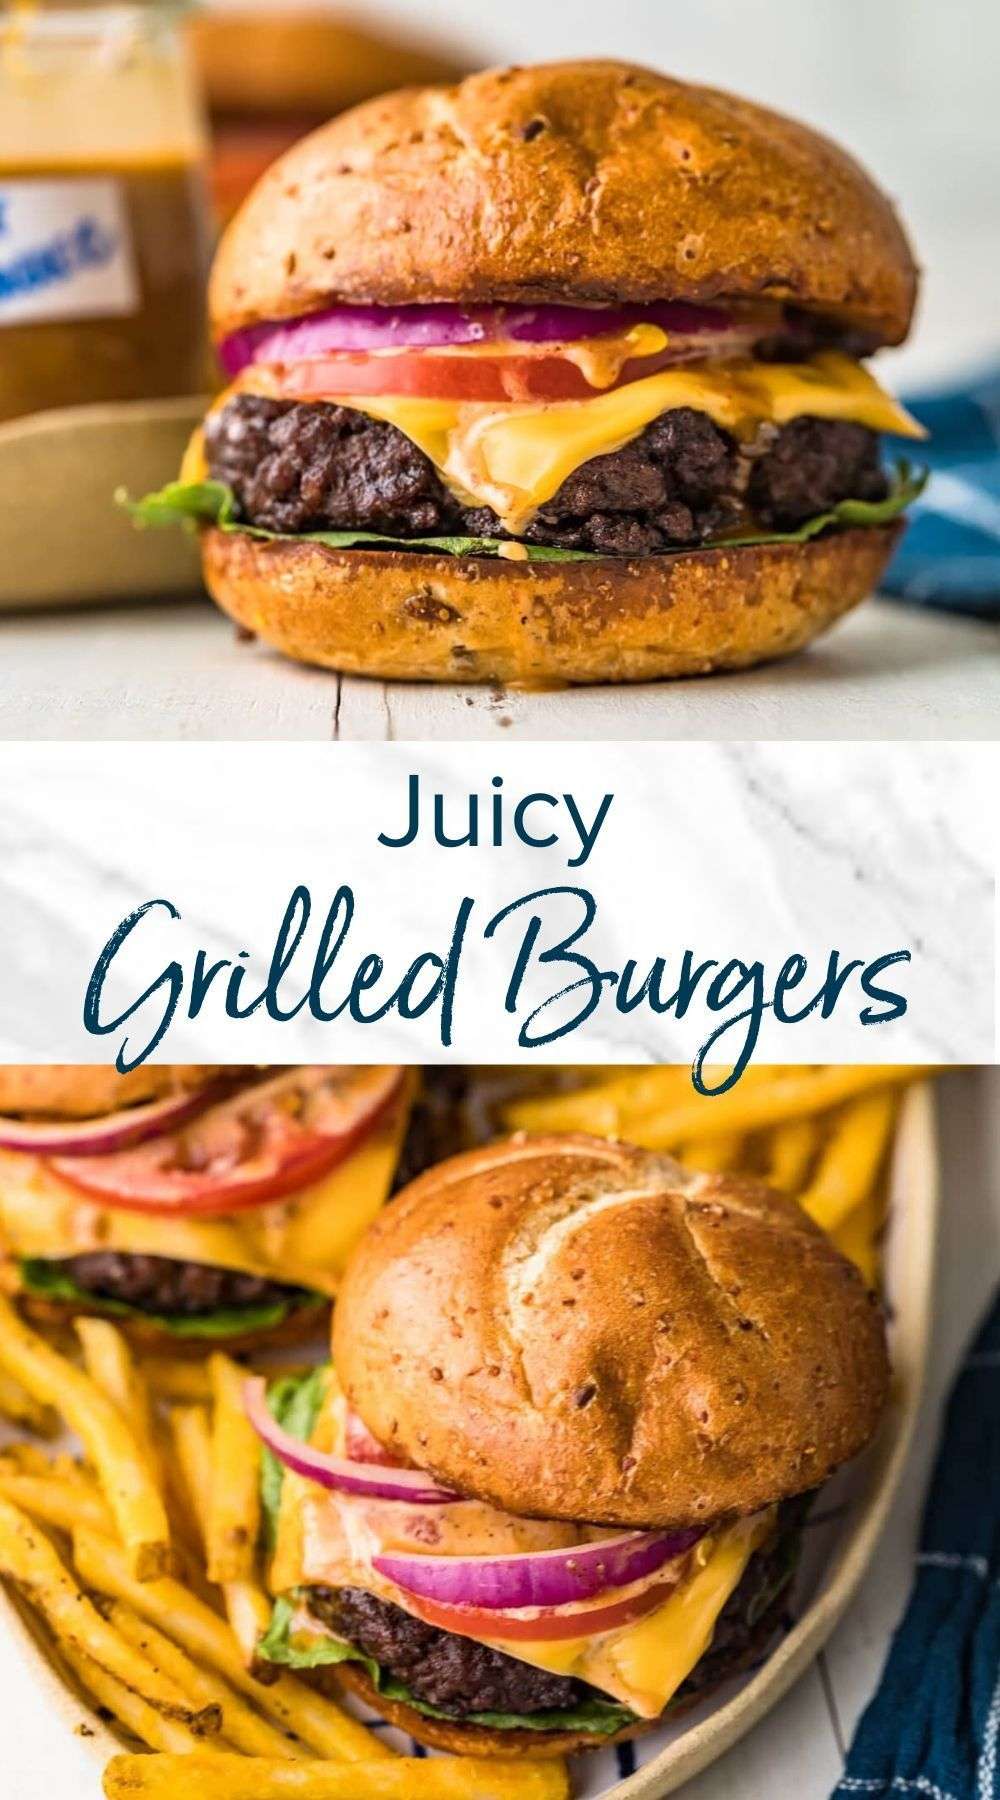 Juicy Grilled Burgers Recipe (How to Grill Burgers in 2020